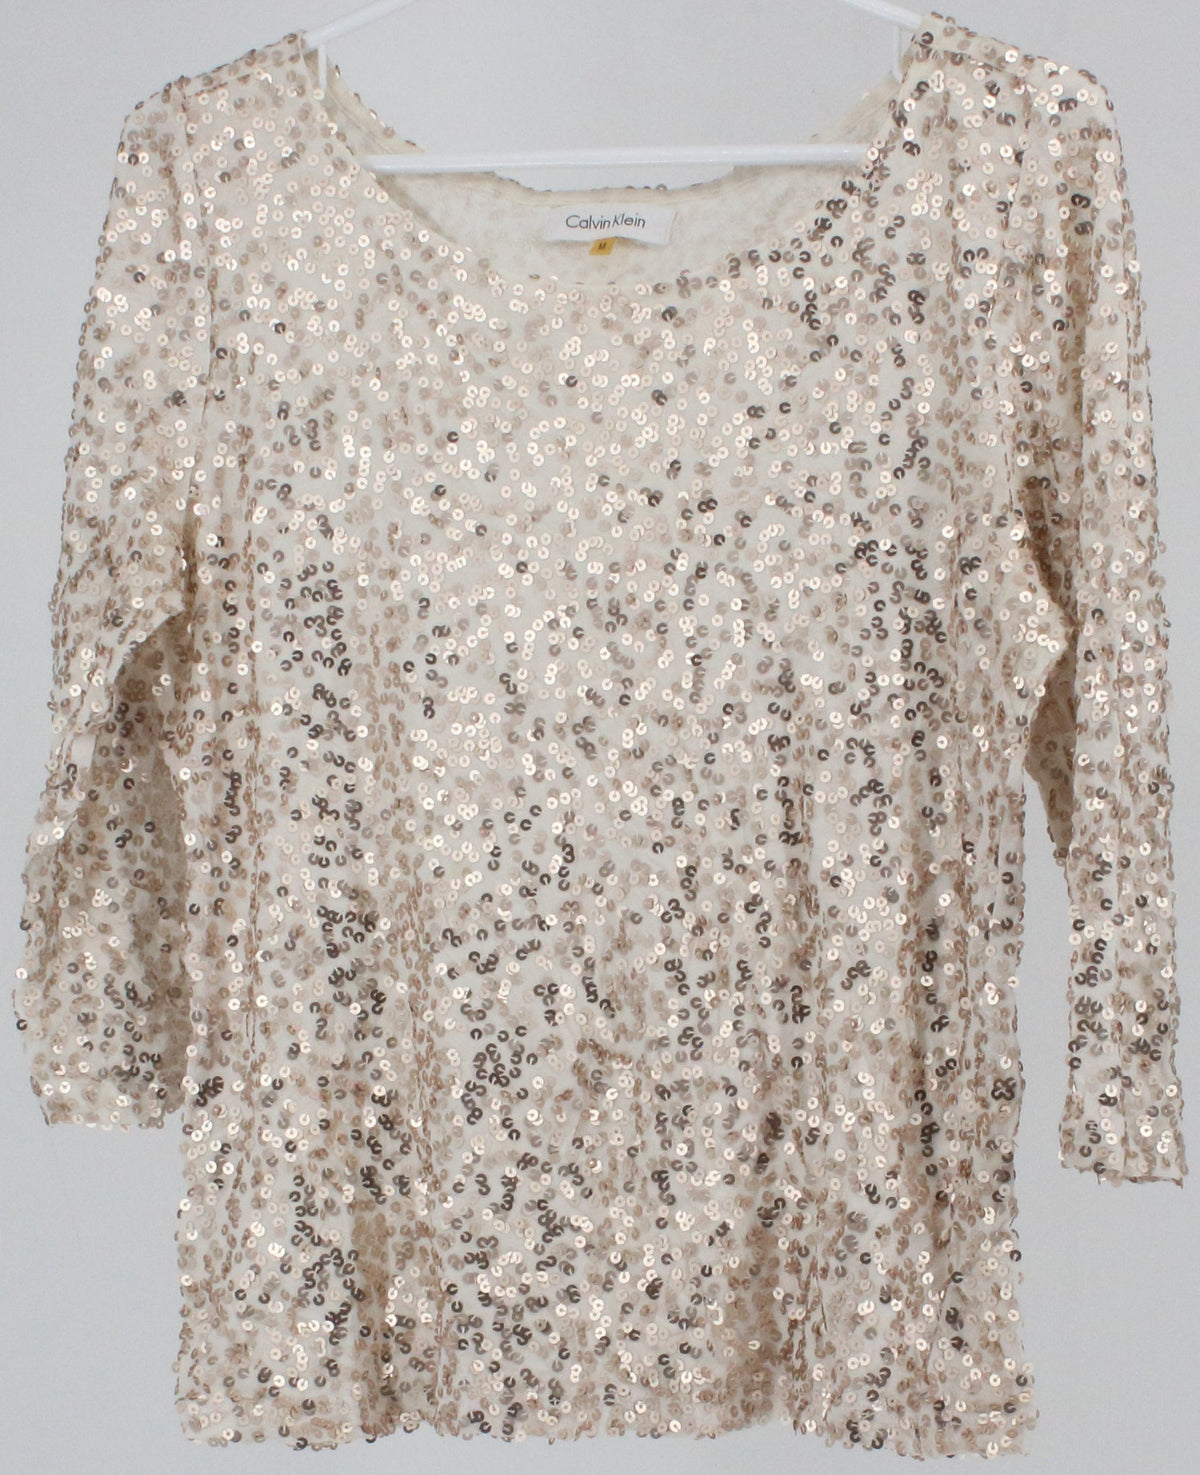 Calvin Klein Off White and Rose Sequins Top